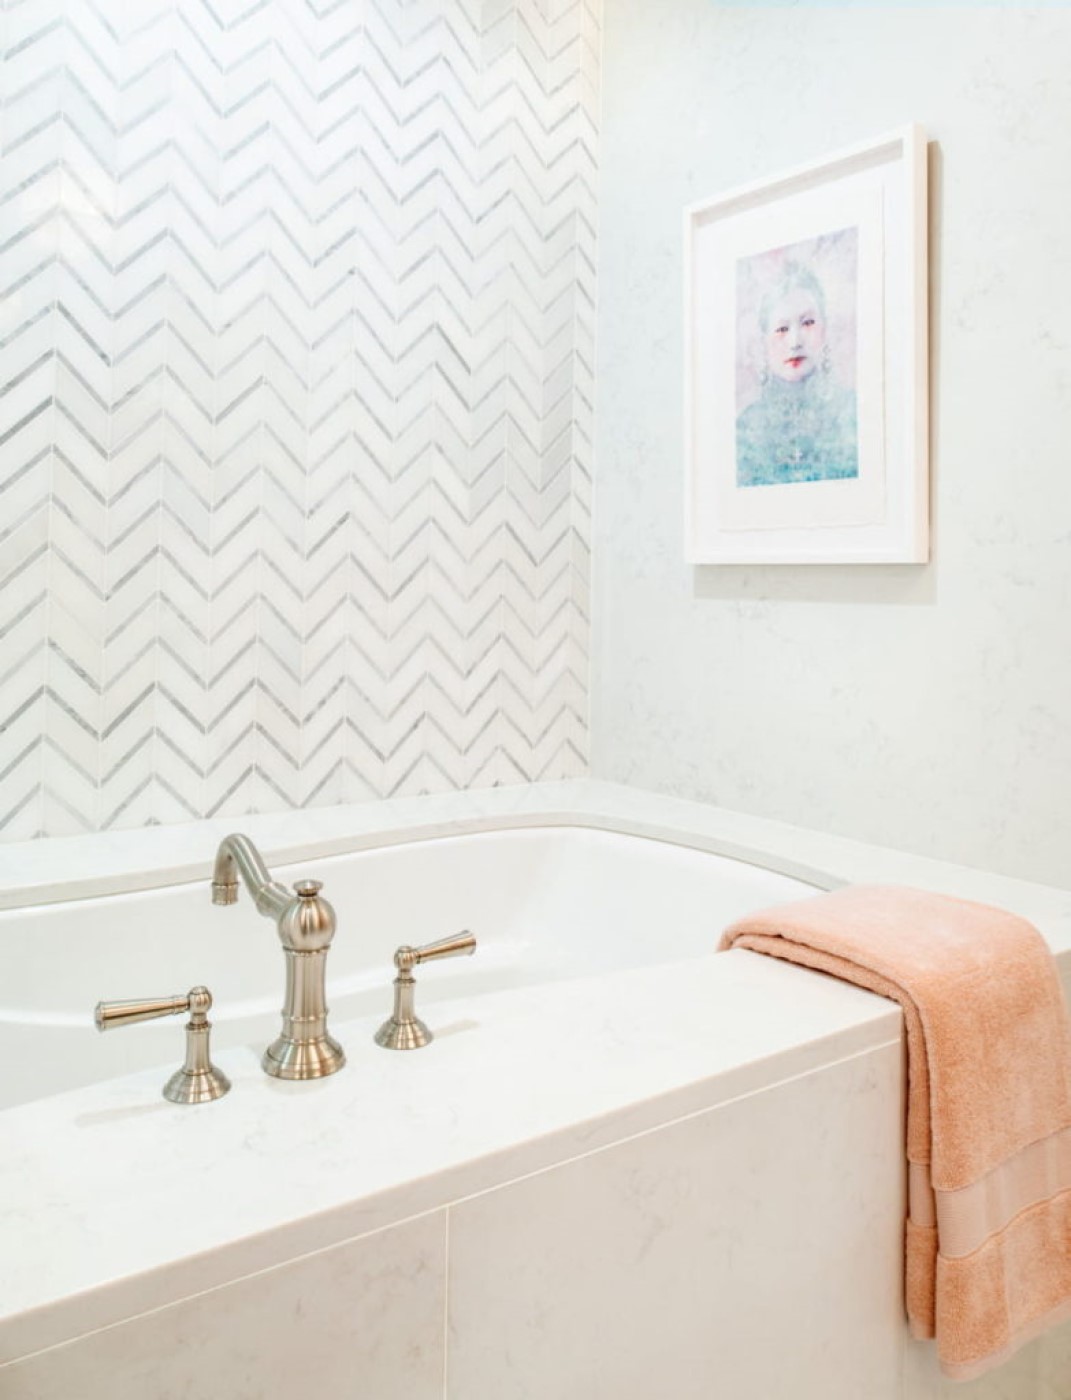 The zig zag mosaic behind the tub and shower offers a refreshing burst of ordered pattern, while the peach towels and rug add a blush of warmth.